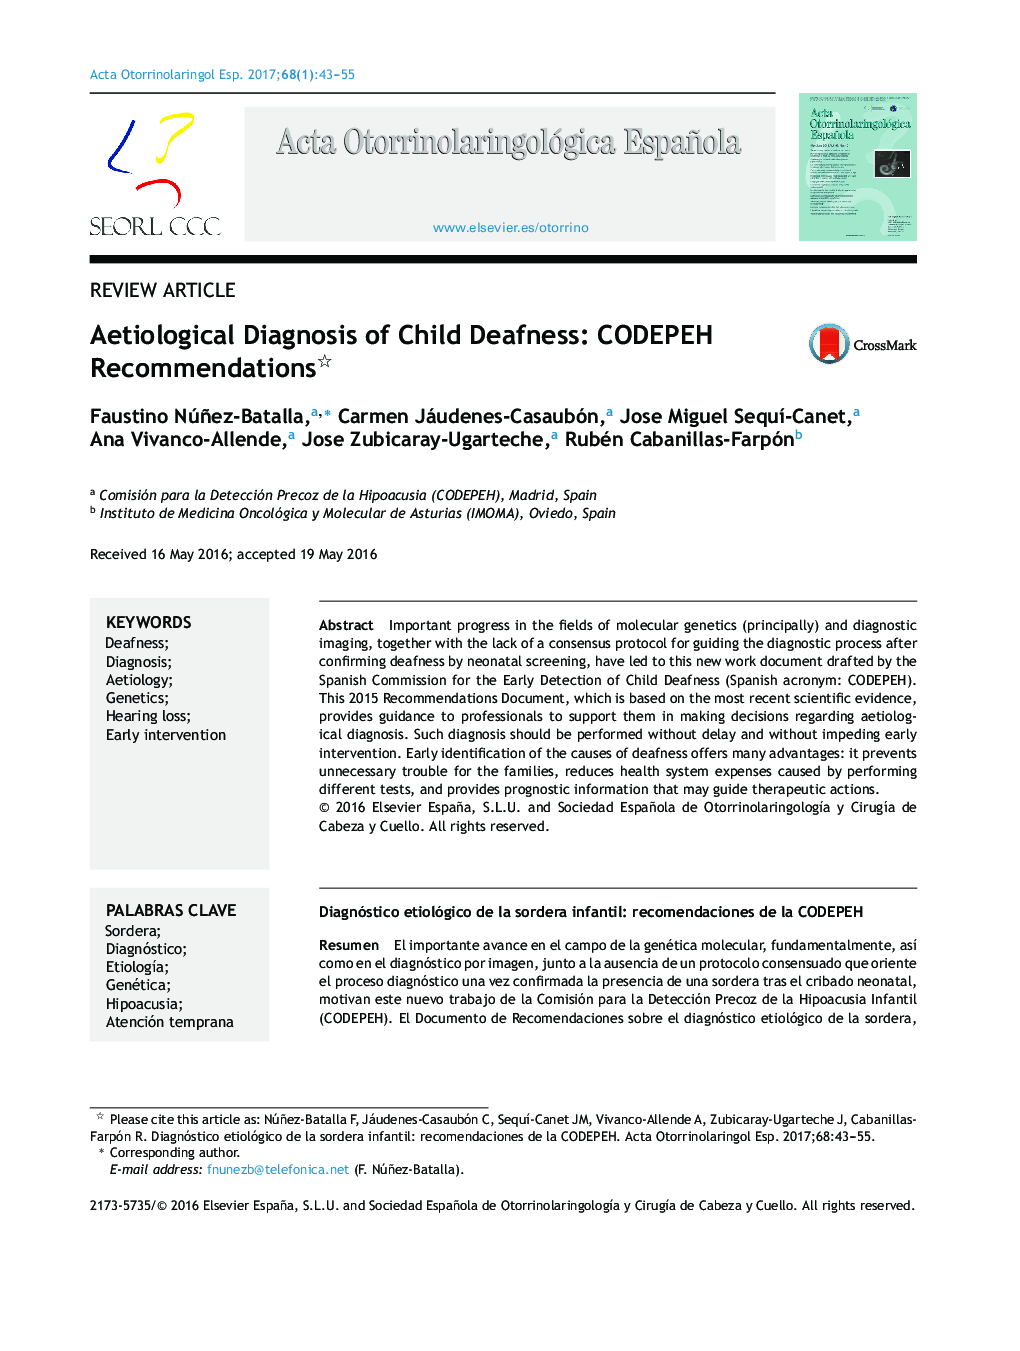 Aetiological Diagnosis of Child Deafness: CODEPEH Recommendations